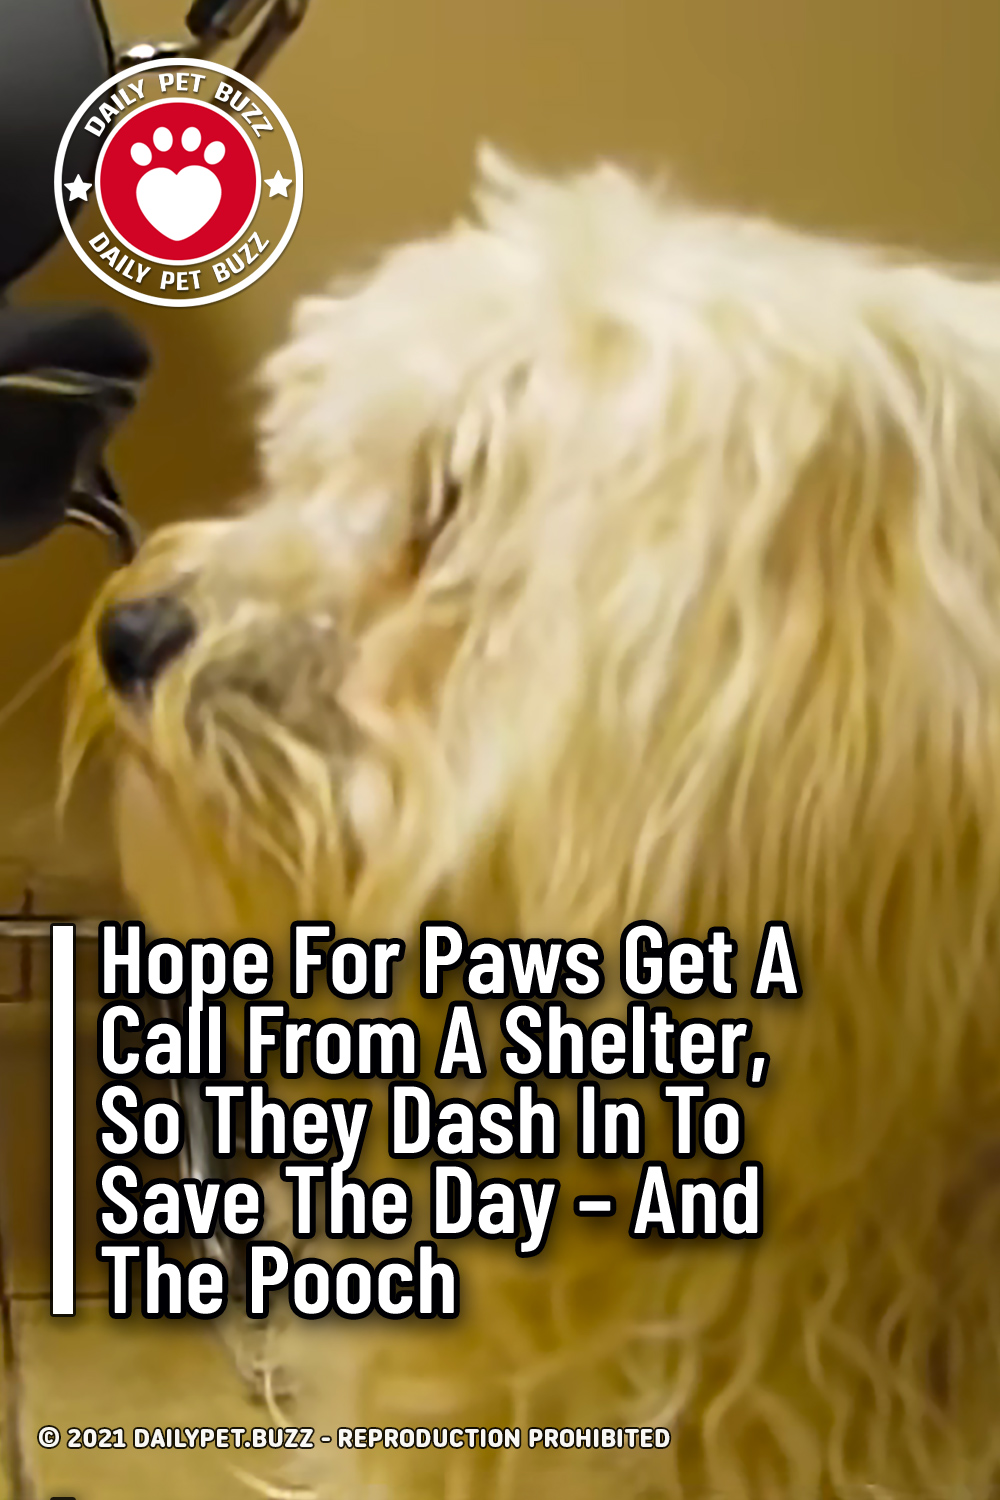 Hope For Paws Get A Call From A Shelter, So They Dash In To Save The Day – And The Pooch